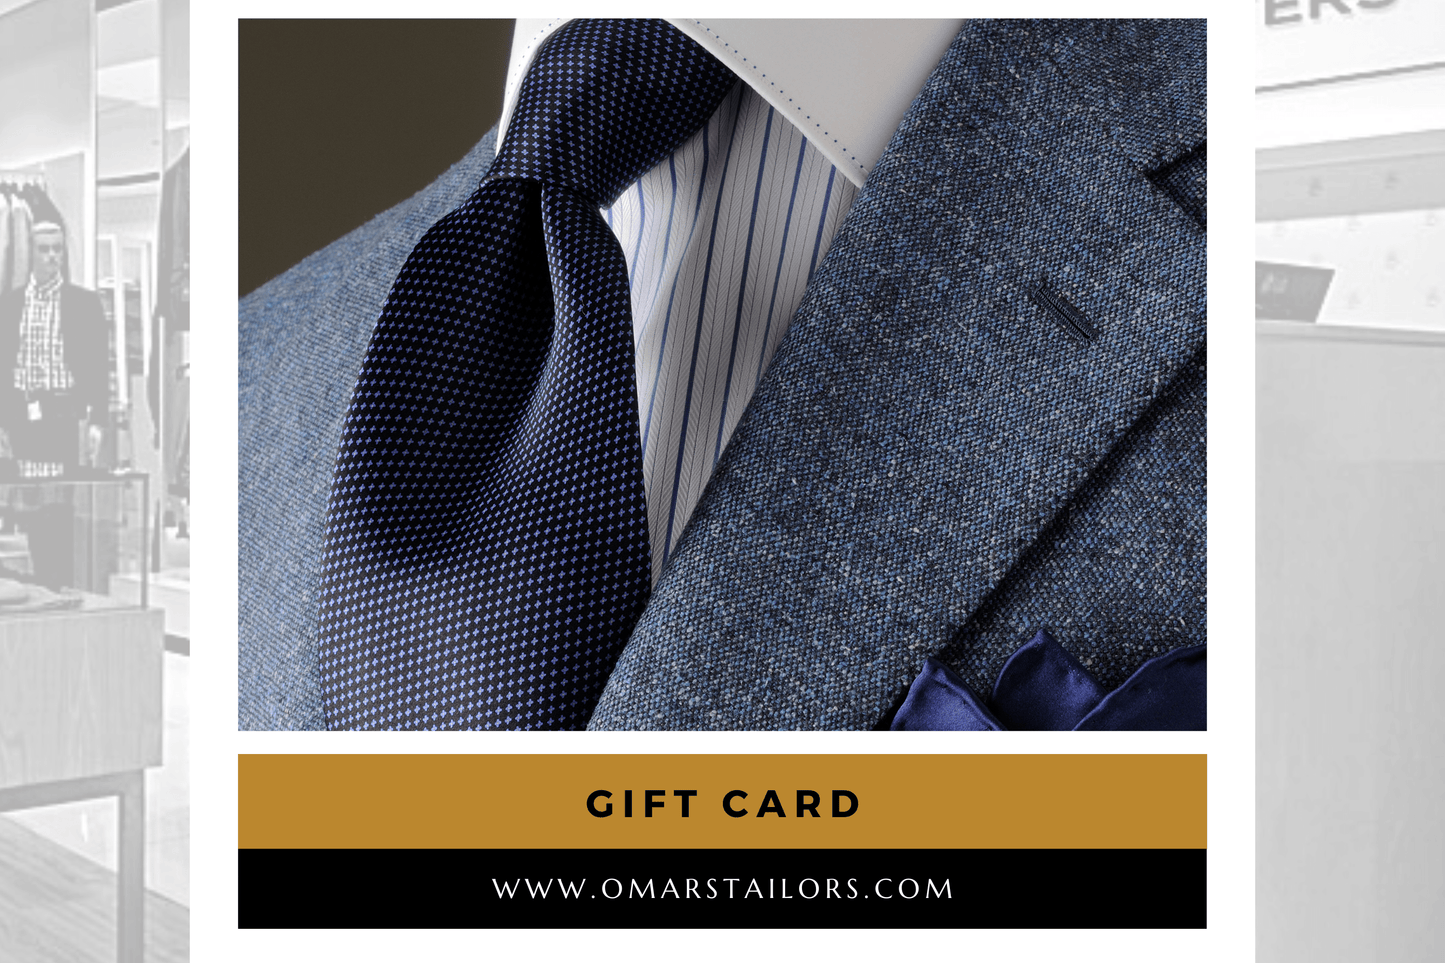 Omar's Tailors & Outfitters Gift Card